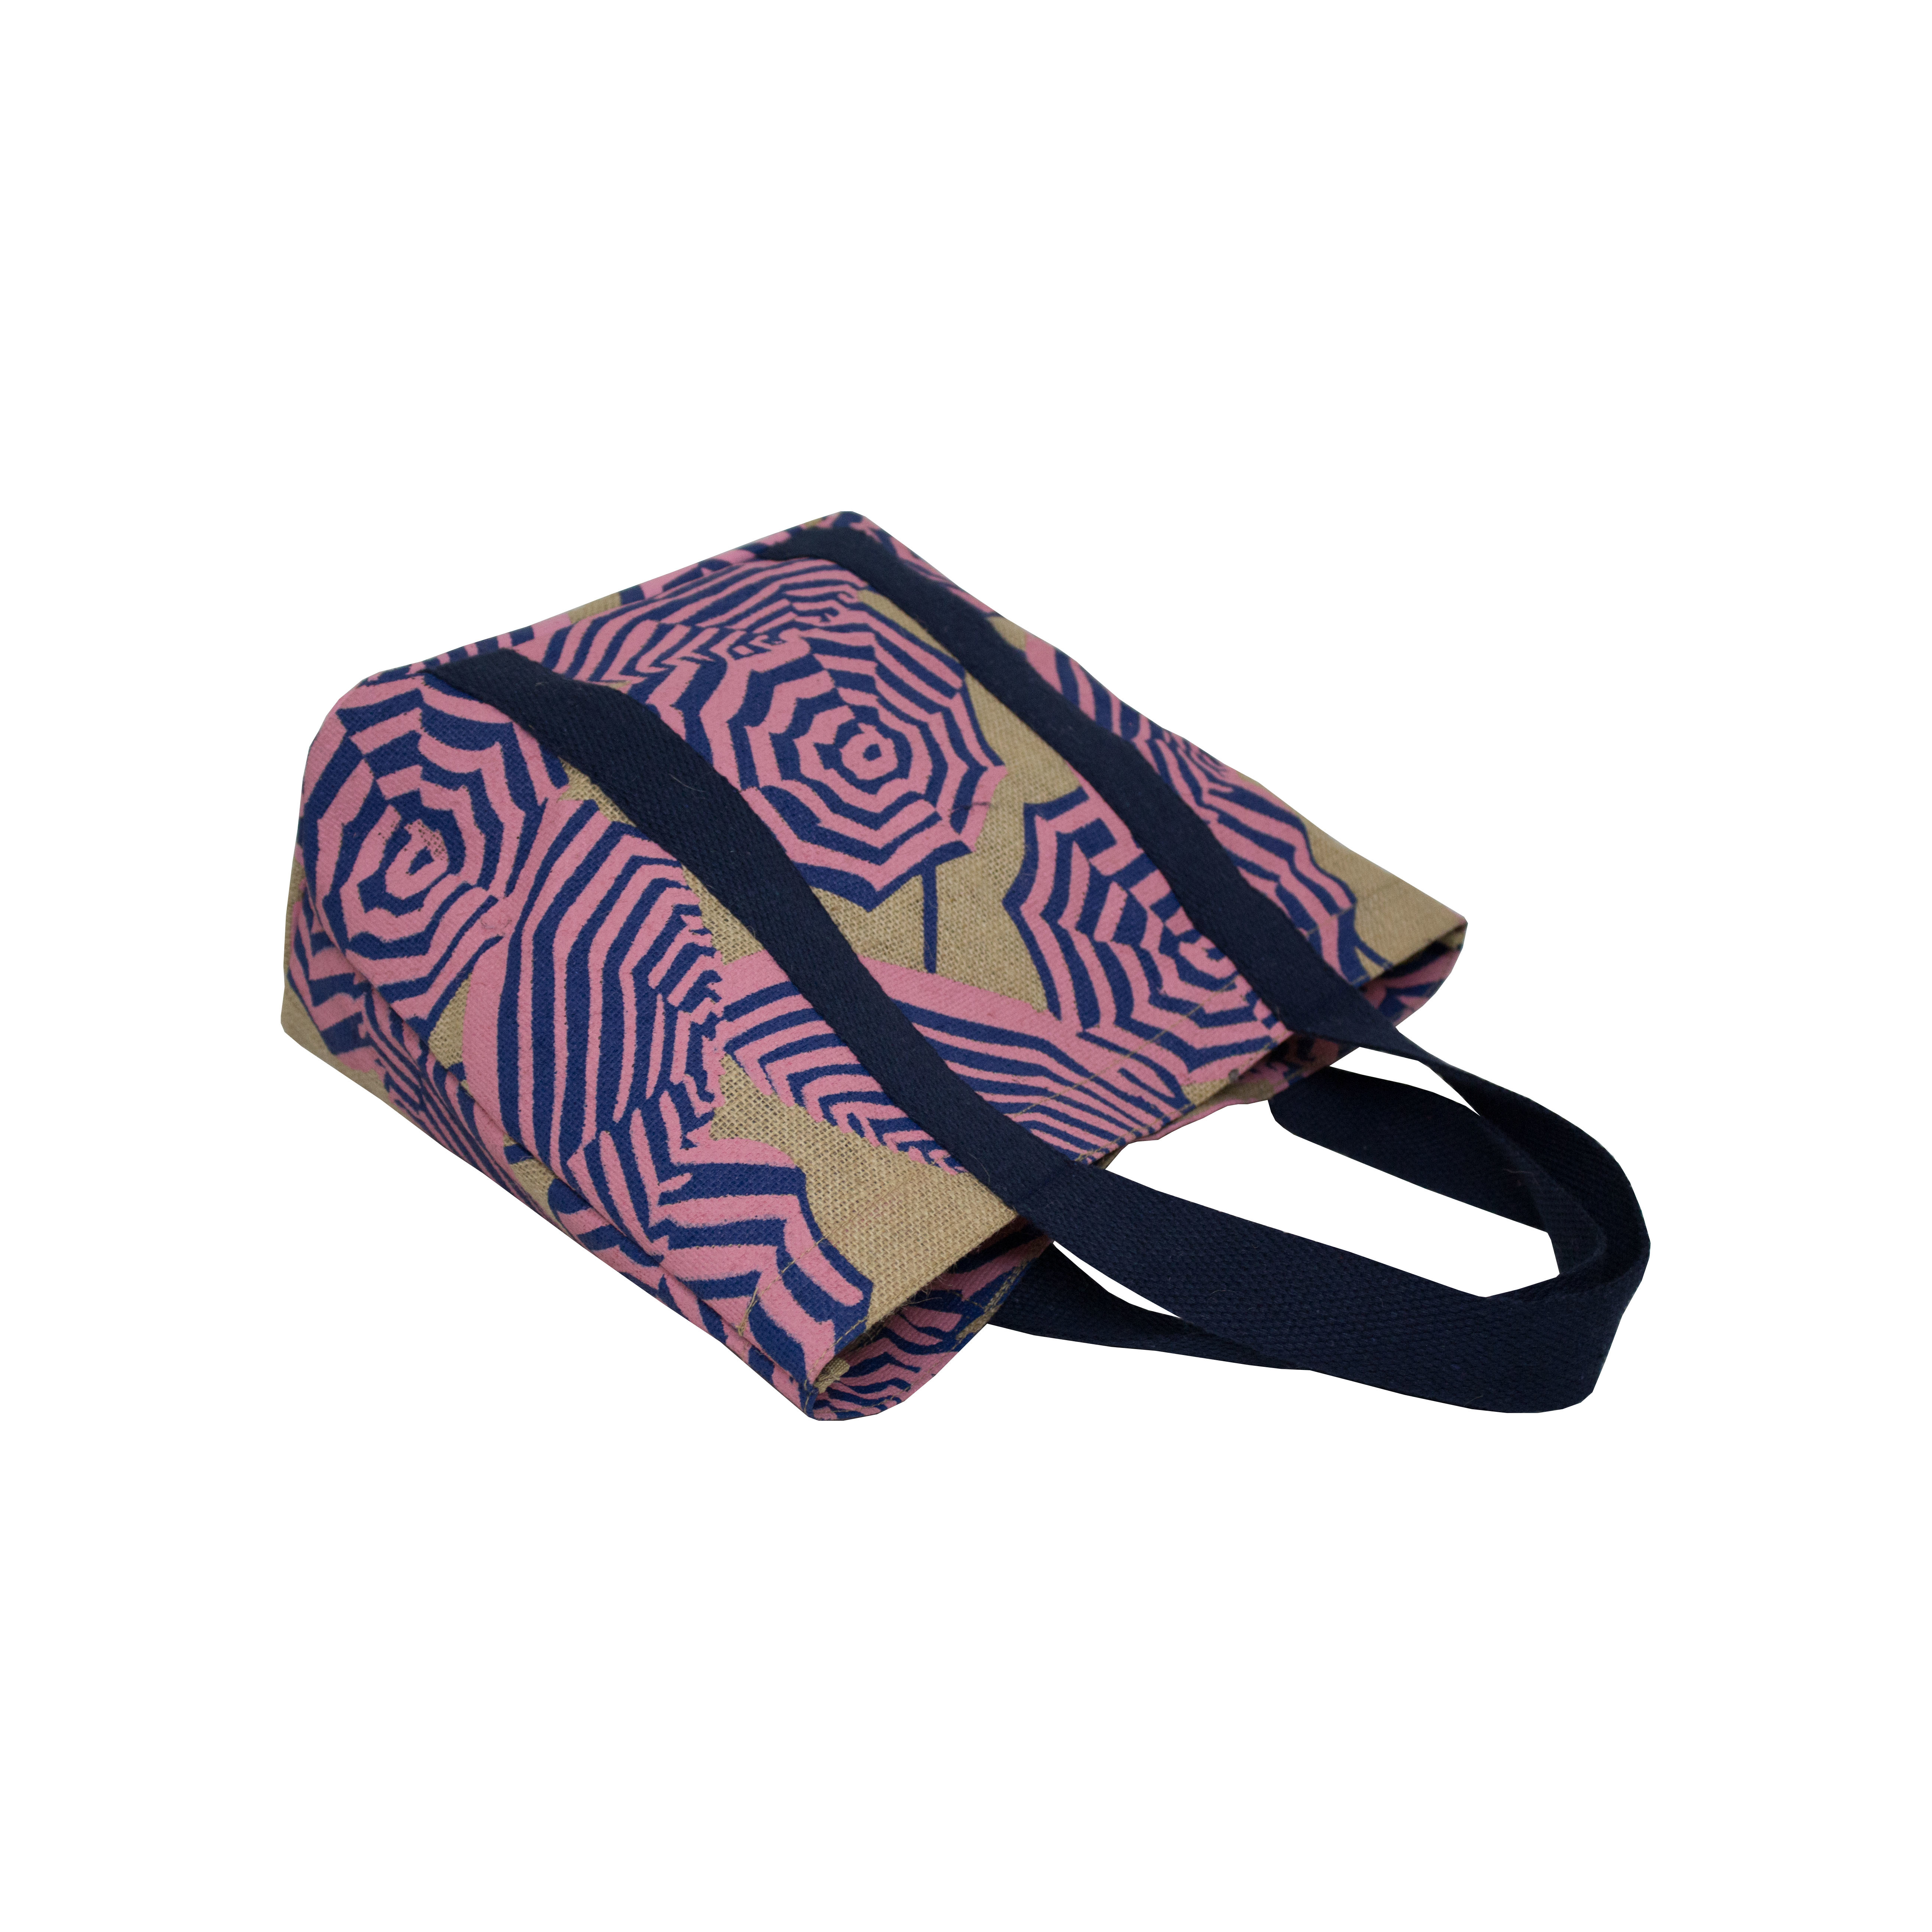 PP Laminated Jute Tote Bag With Two Color Overall Umbrella Print